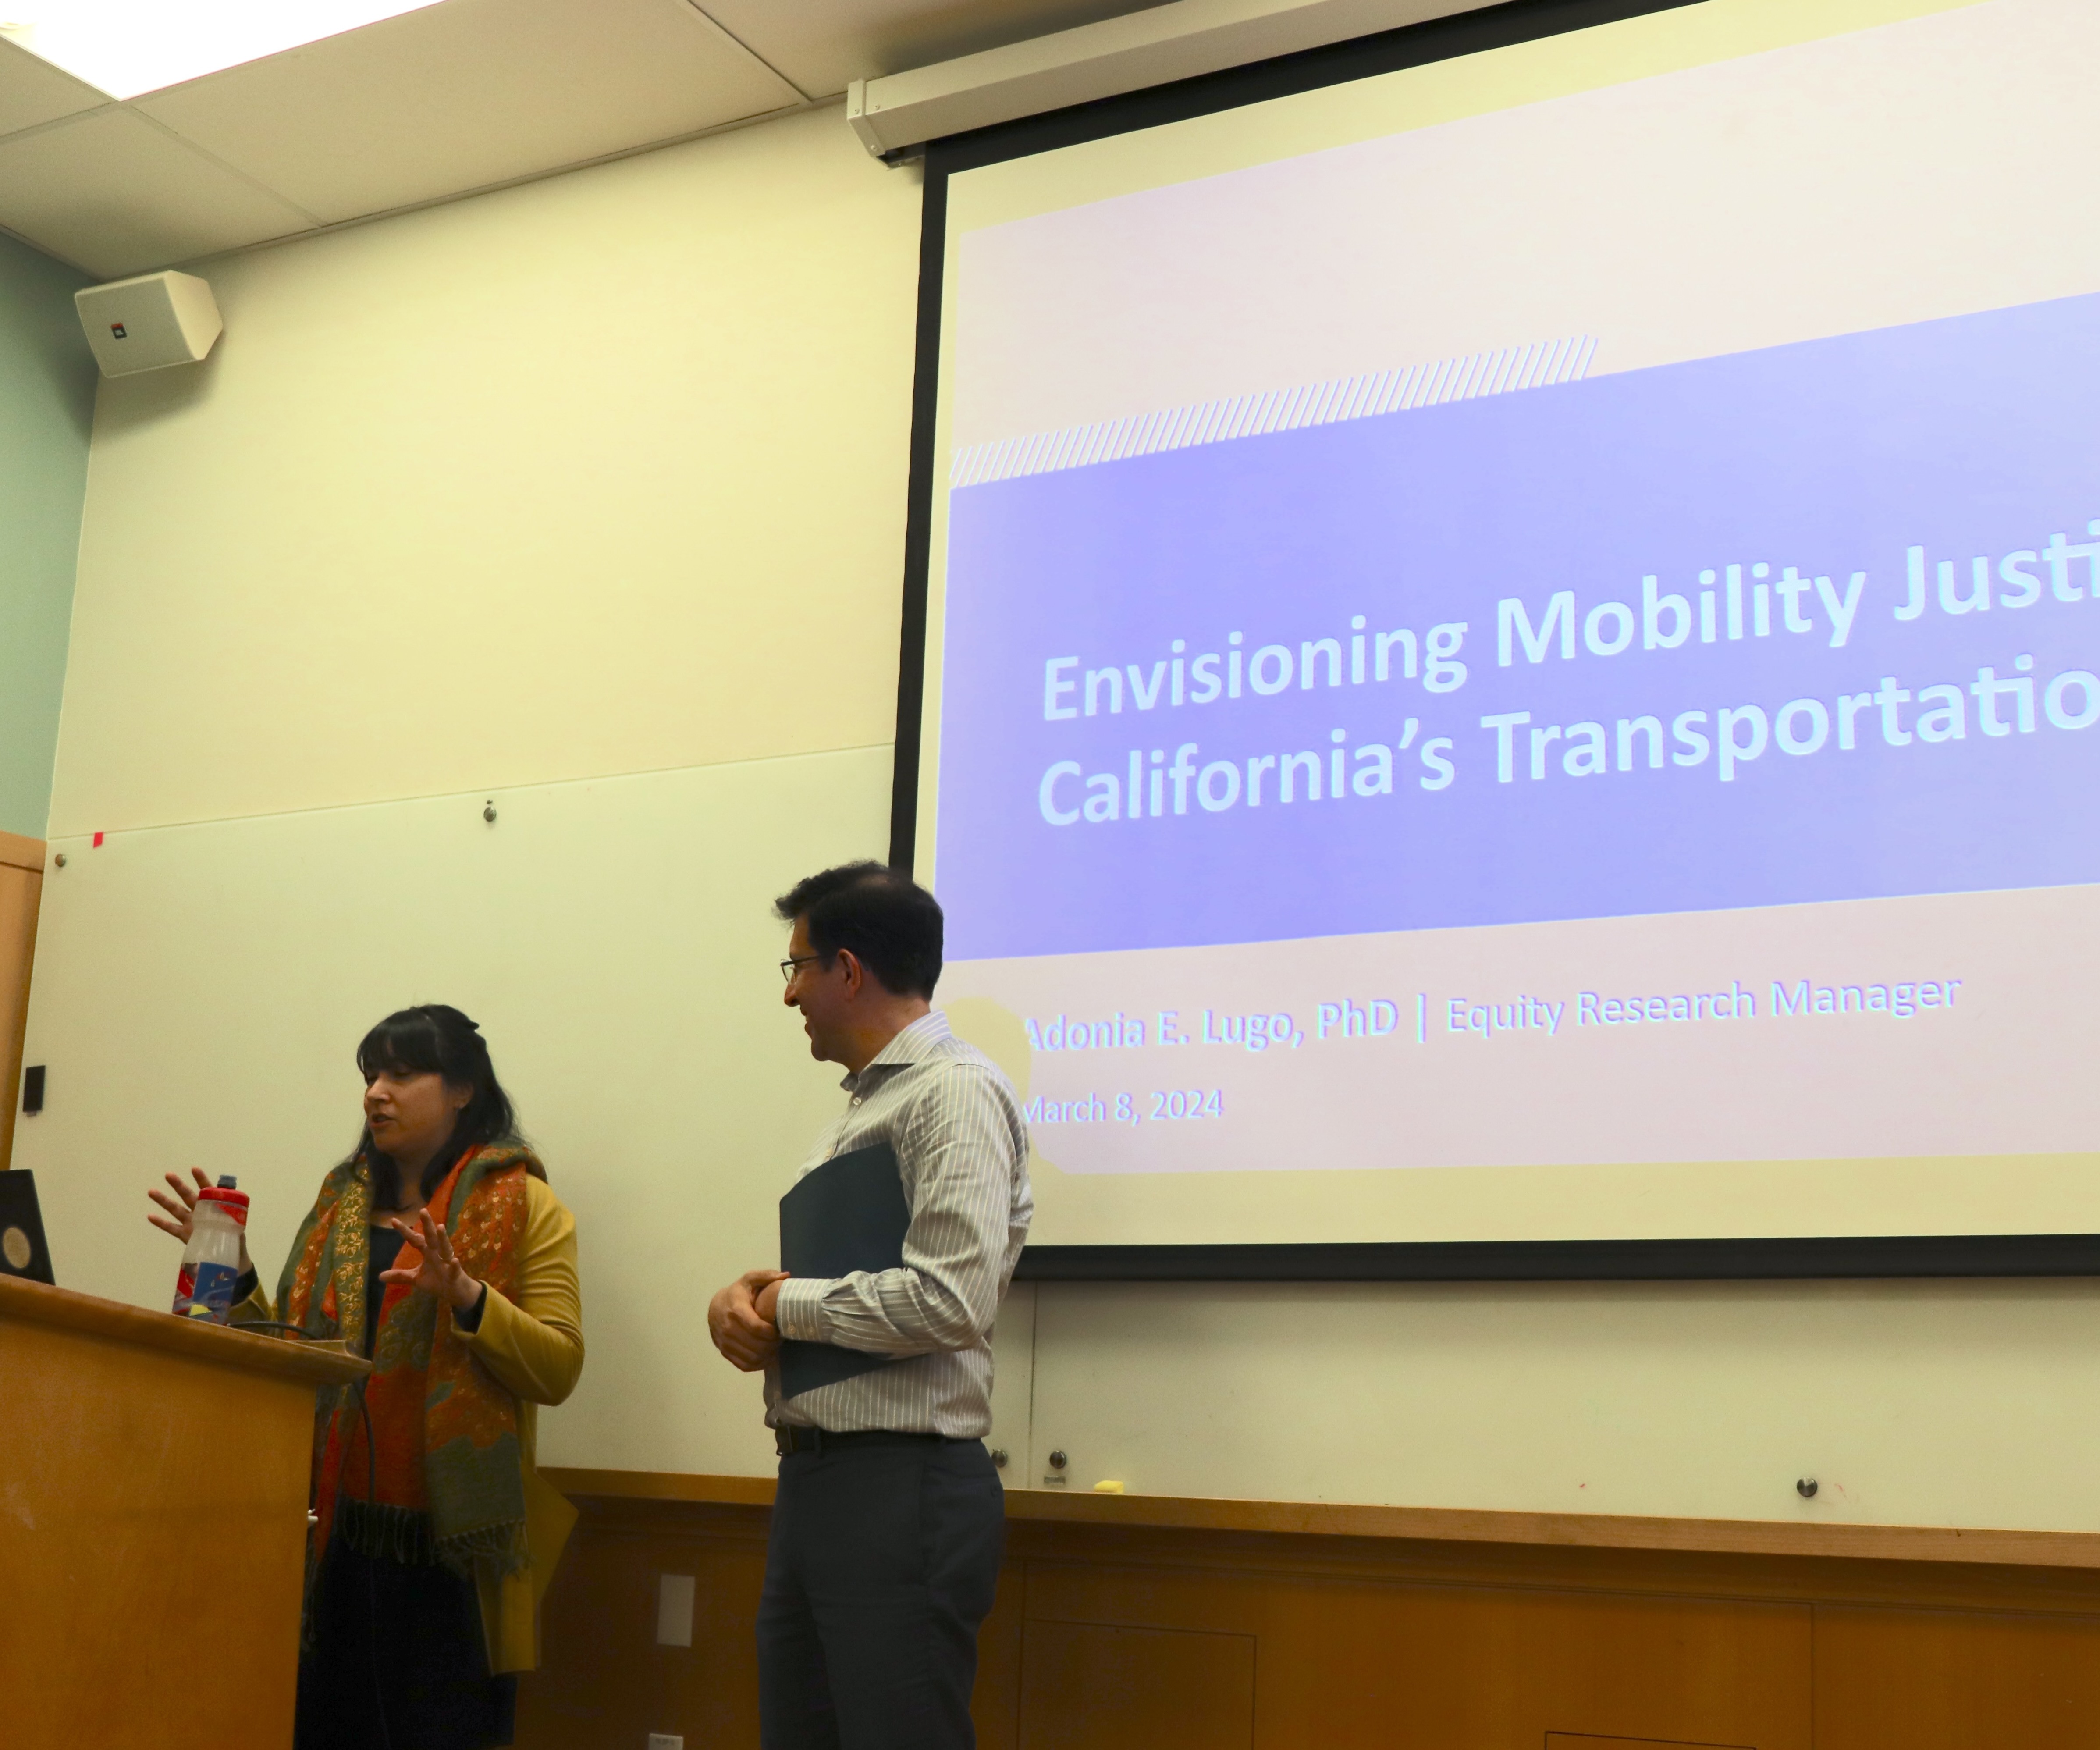 Adonia Lugo, Equity Research Manager at University of California Institute of Transportation Studies/ITS UCLA, presents at the ITS Transportation Seminar